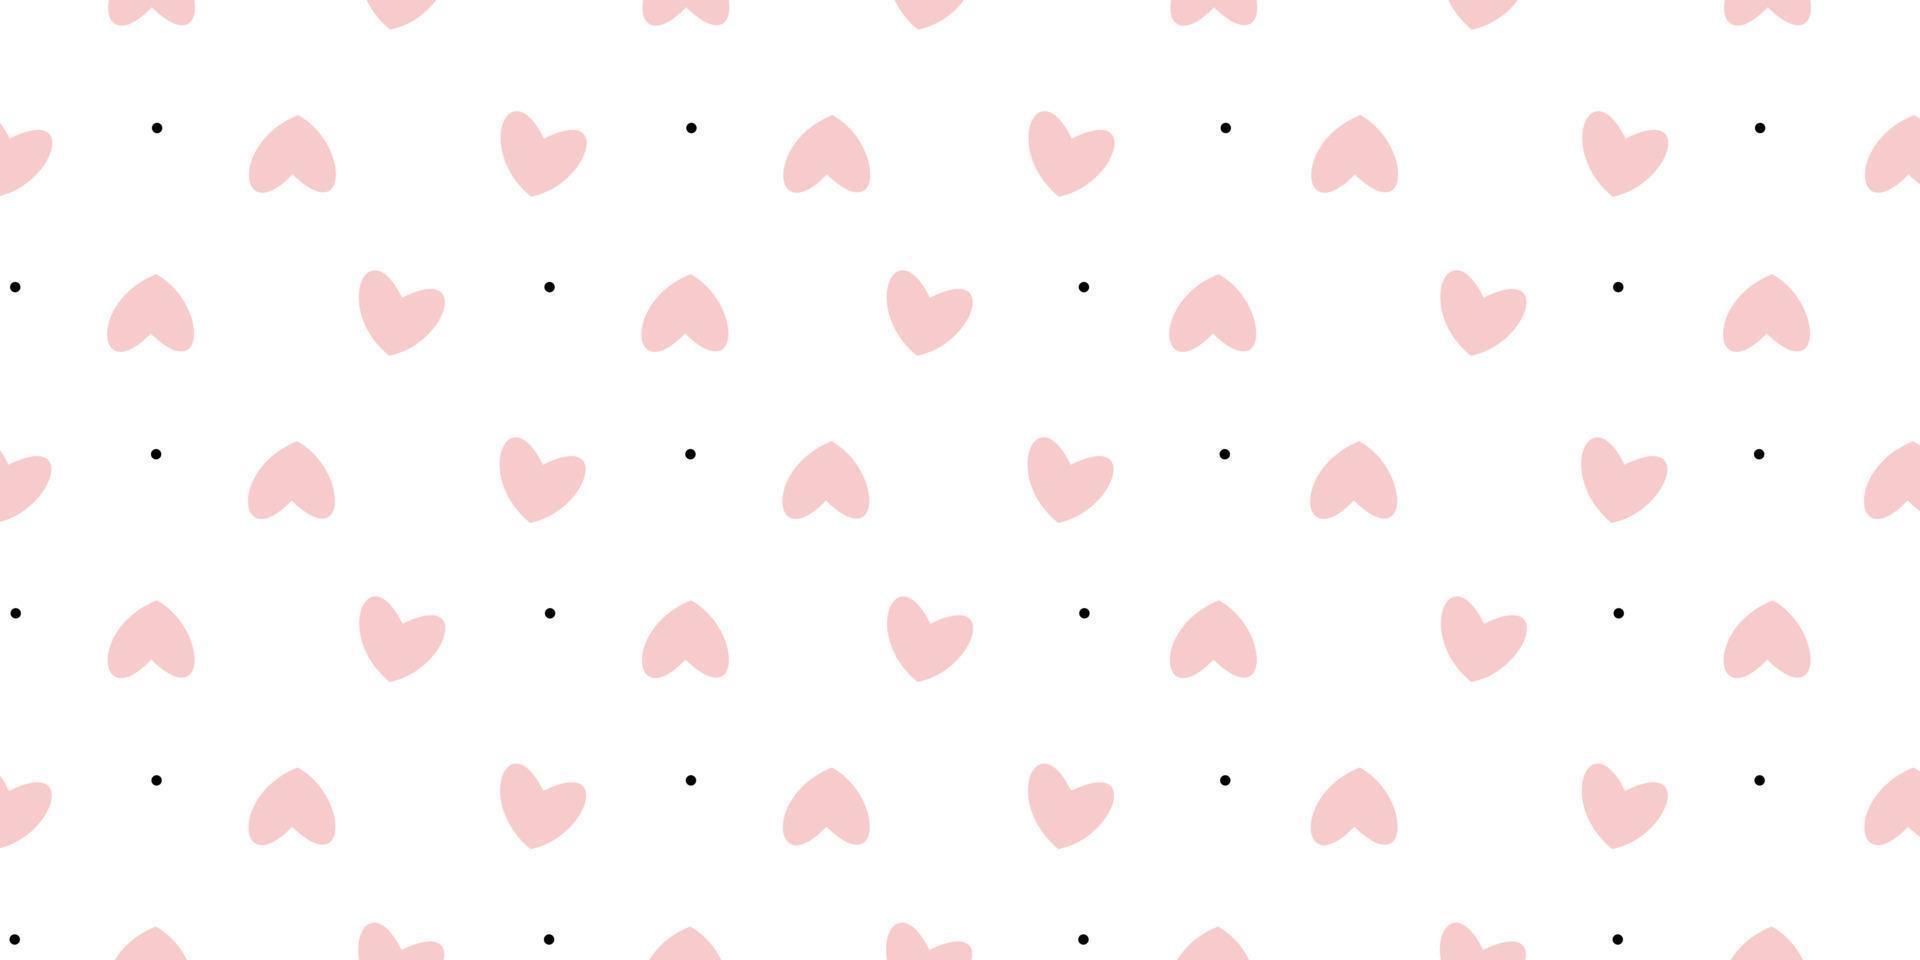 Cute and simple love pattern for background. Valentine wallpaper design vector